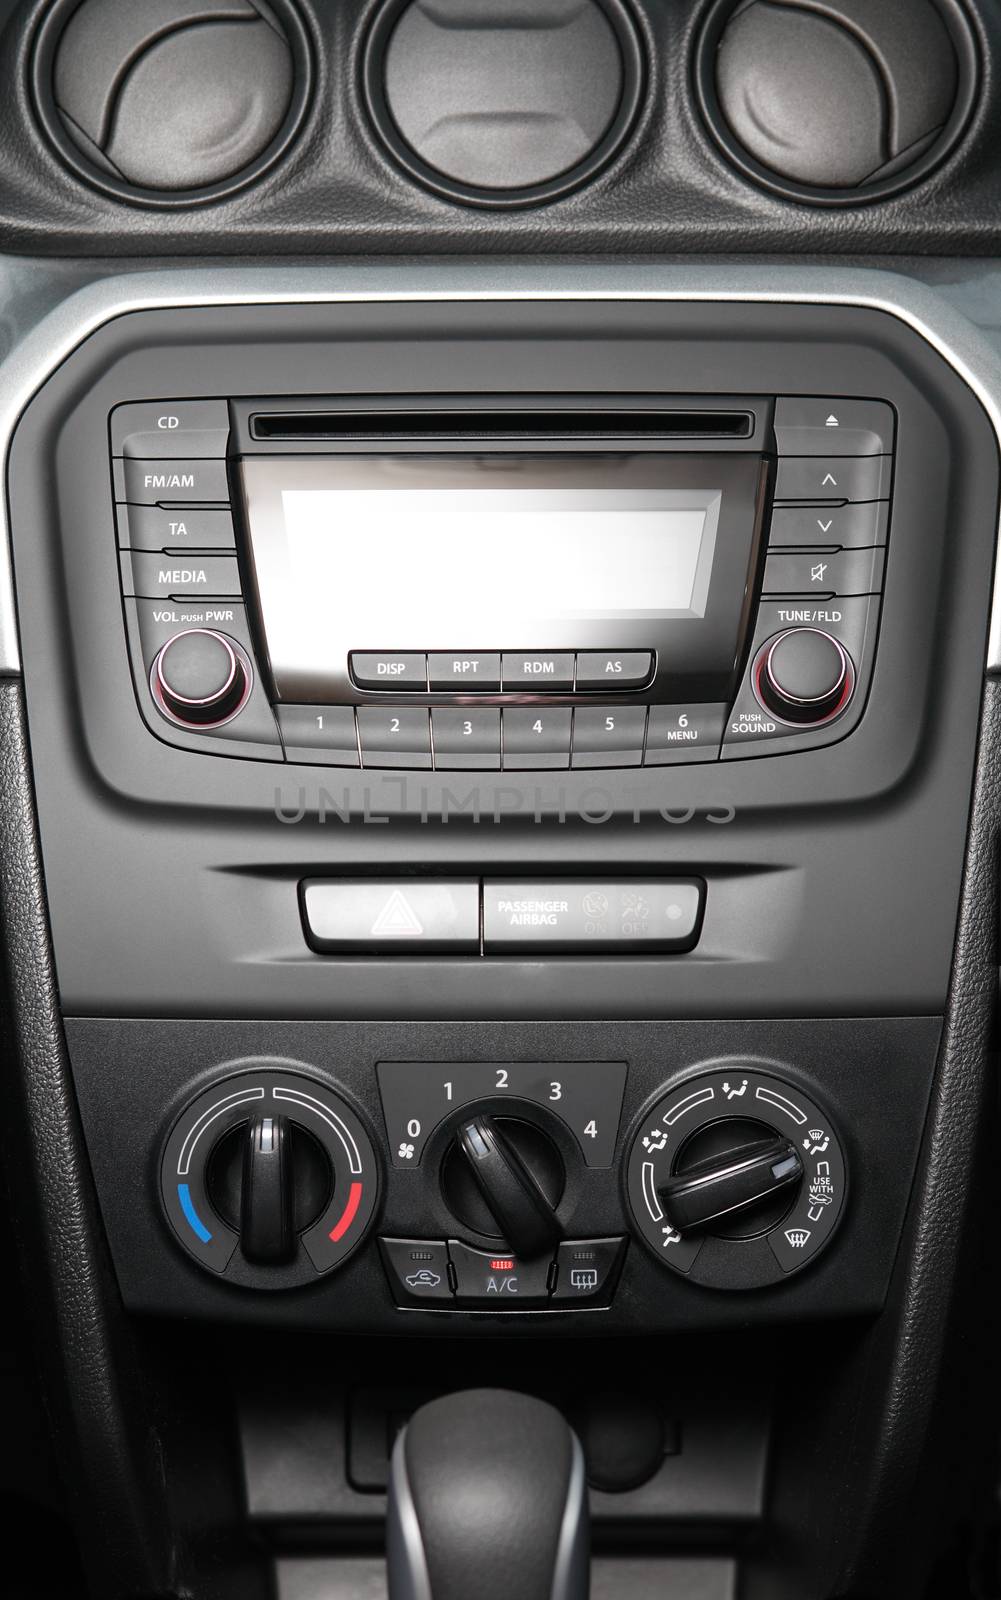 Dashboard with audio equipment in cabin of the modern new car